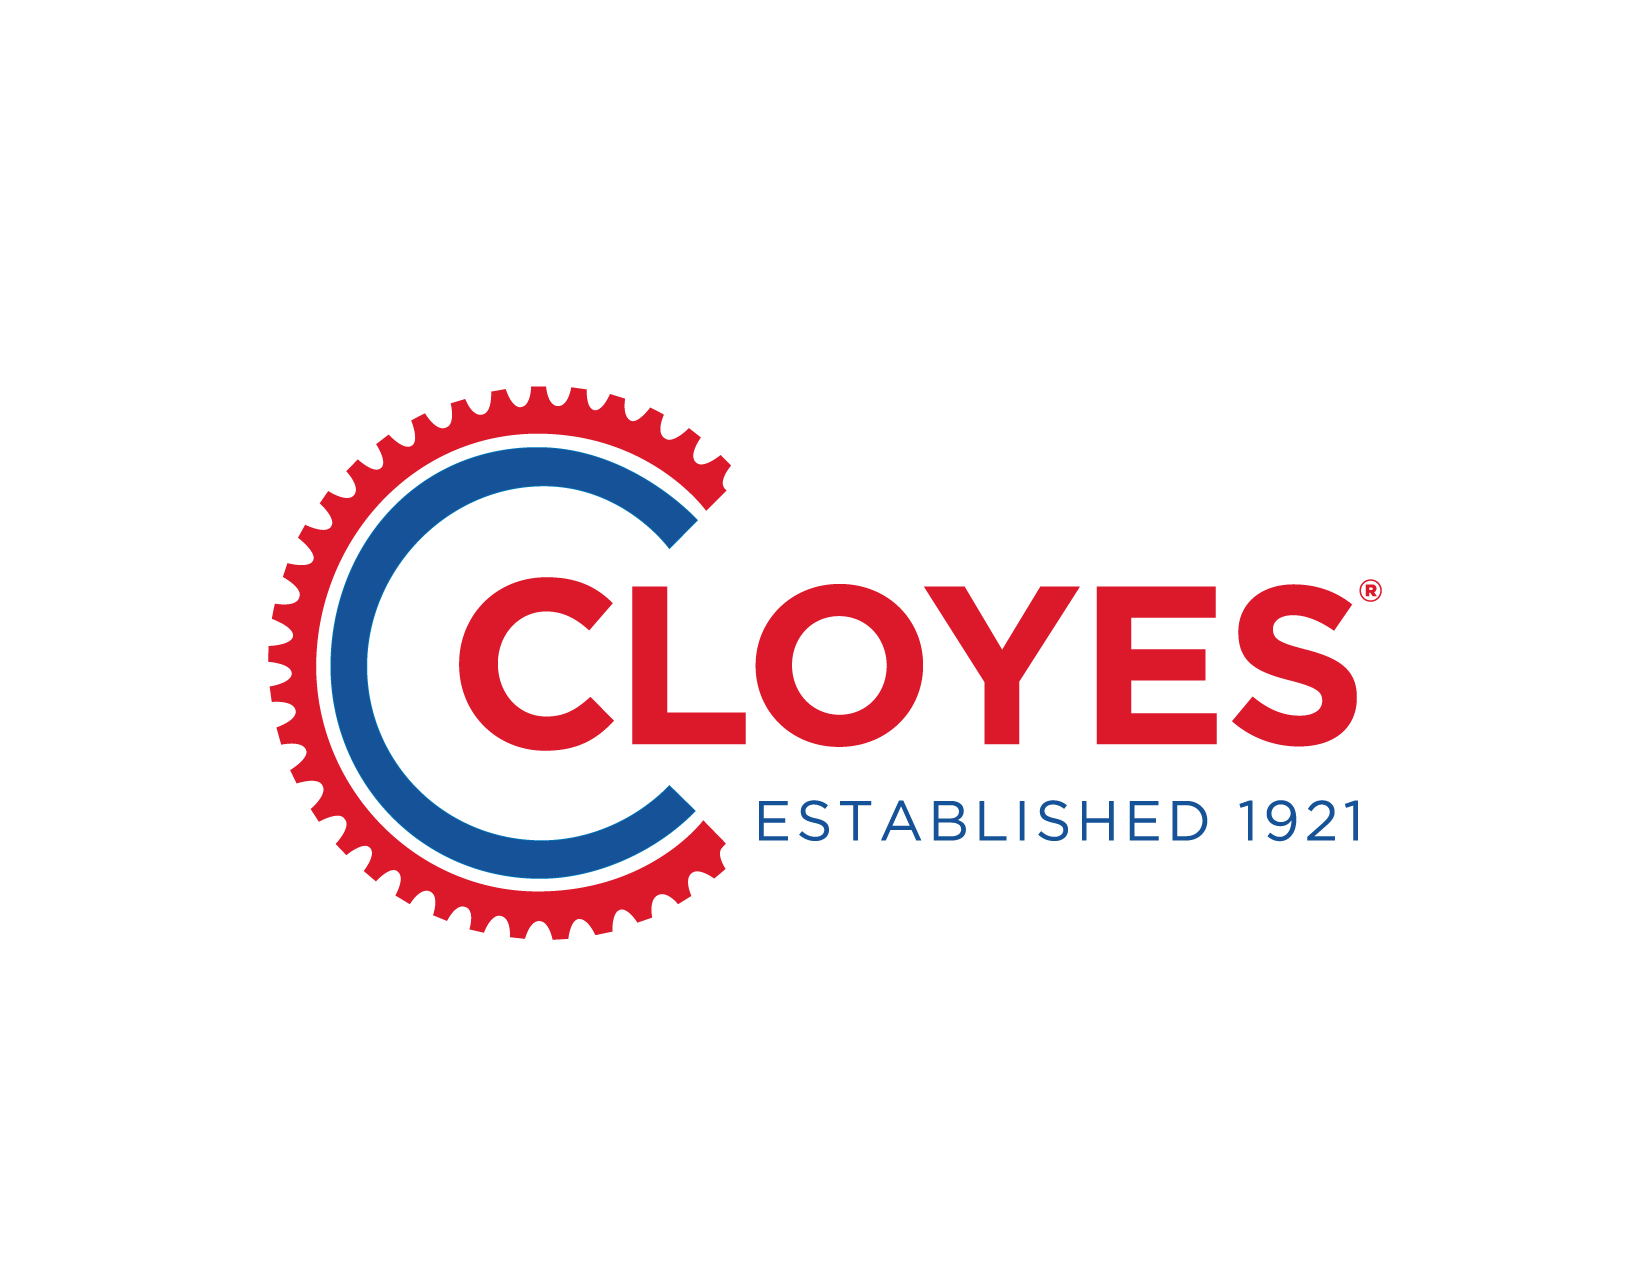 Cloyes’ engineering focuses on the complete timing system